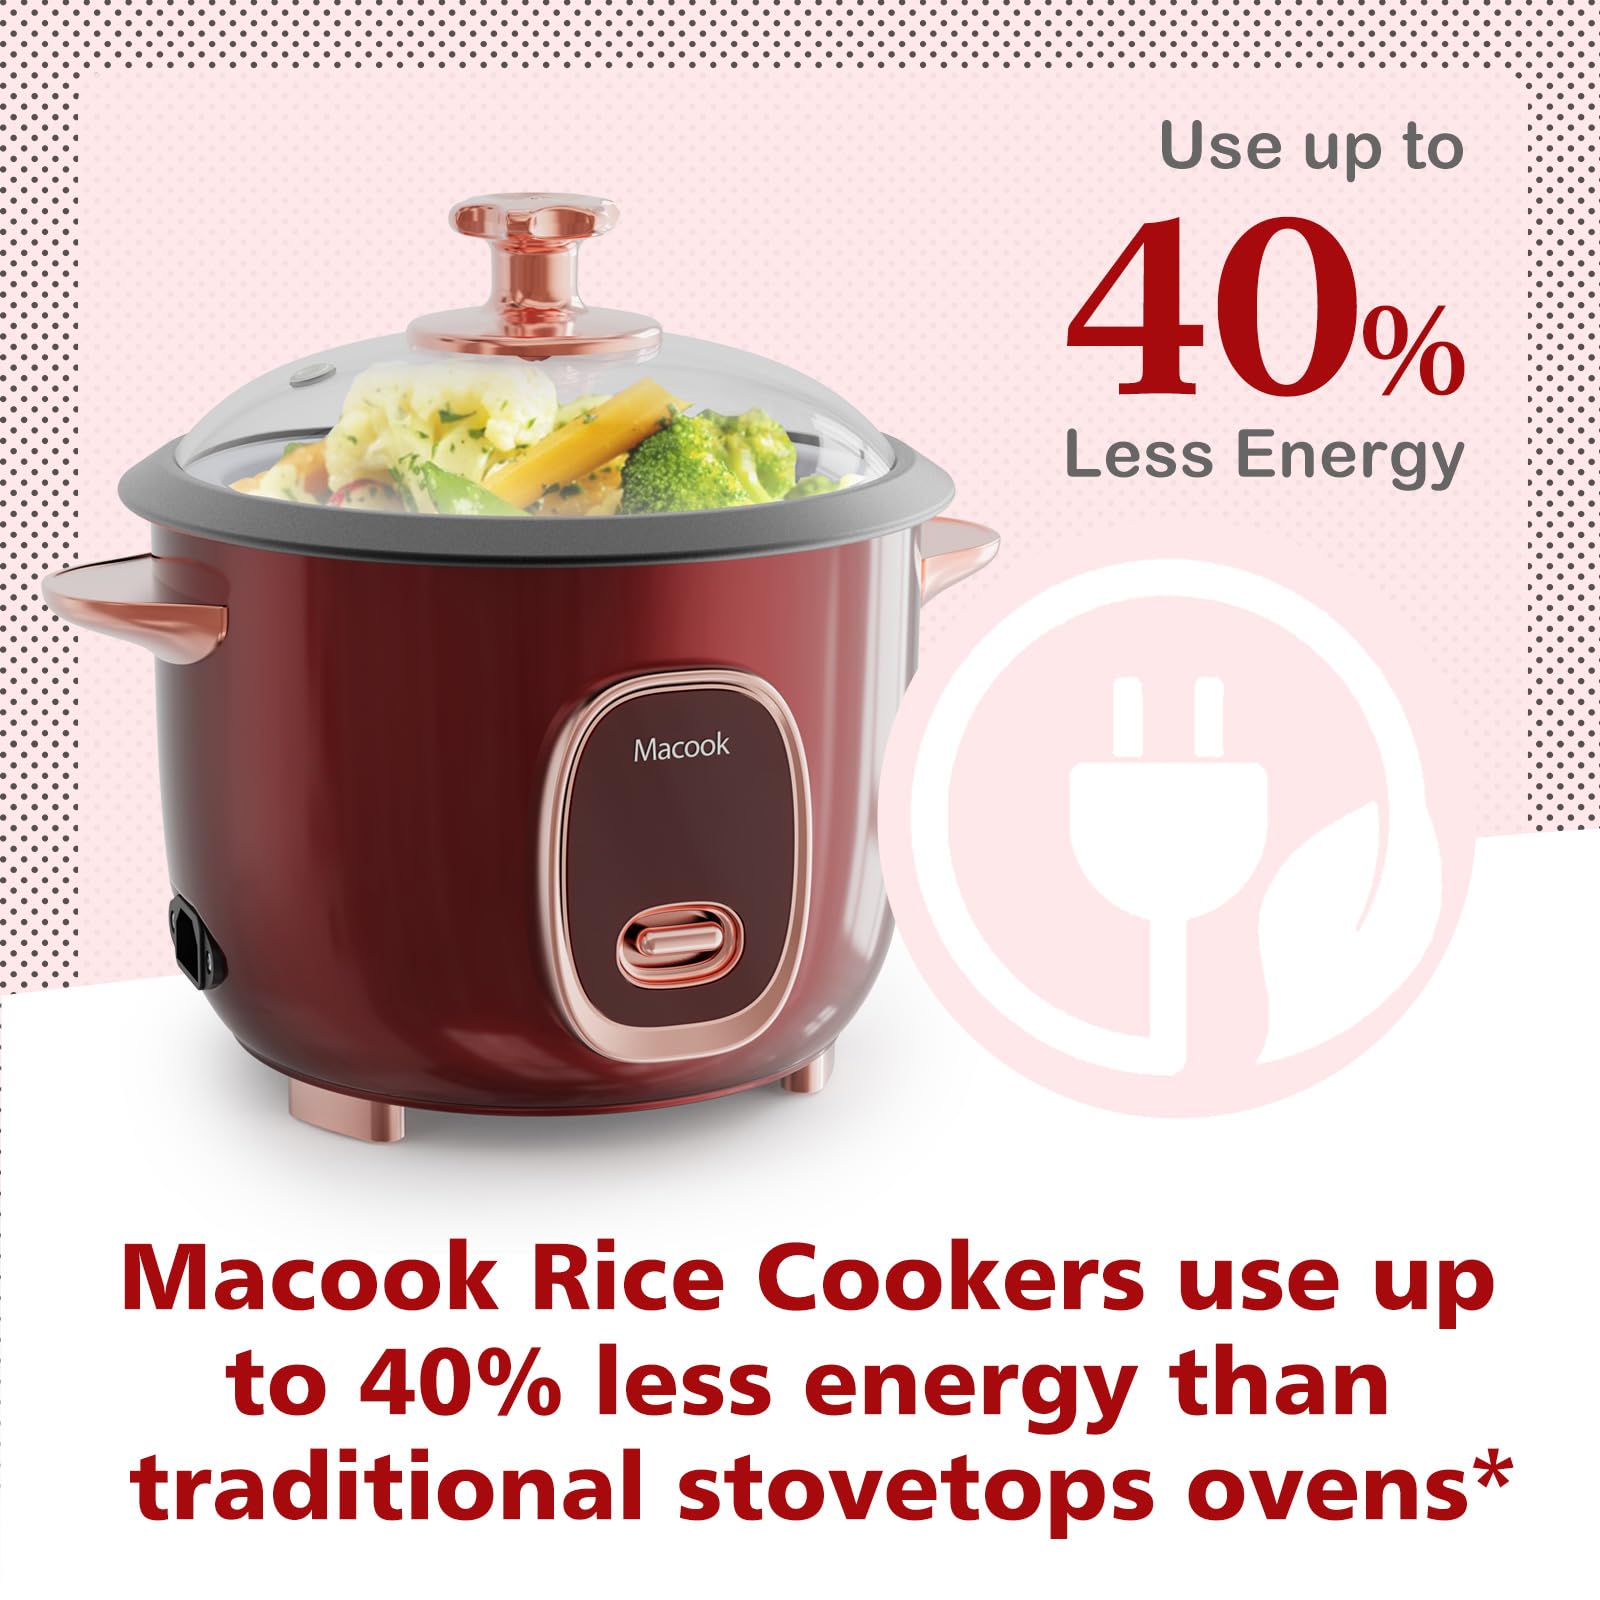 Macook Mini Rice Cooker Small Rice Cooker 3 Cup, Portable Travel Rice Cooker, Auto Keep Warm